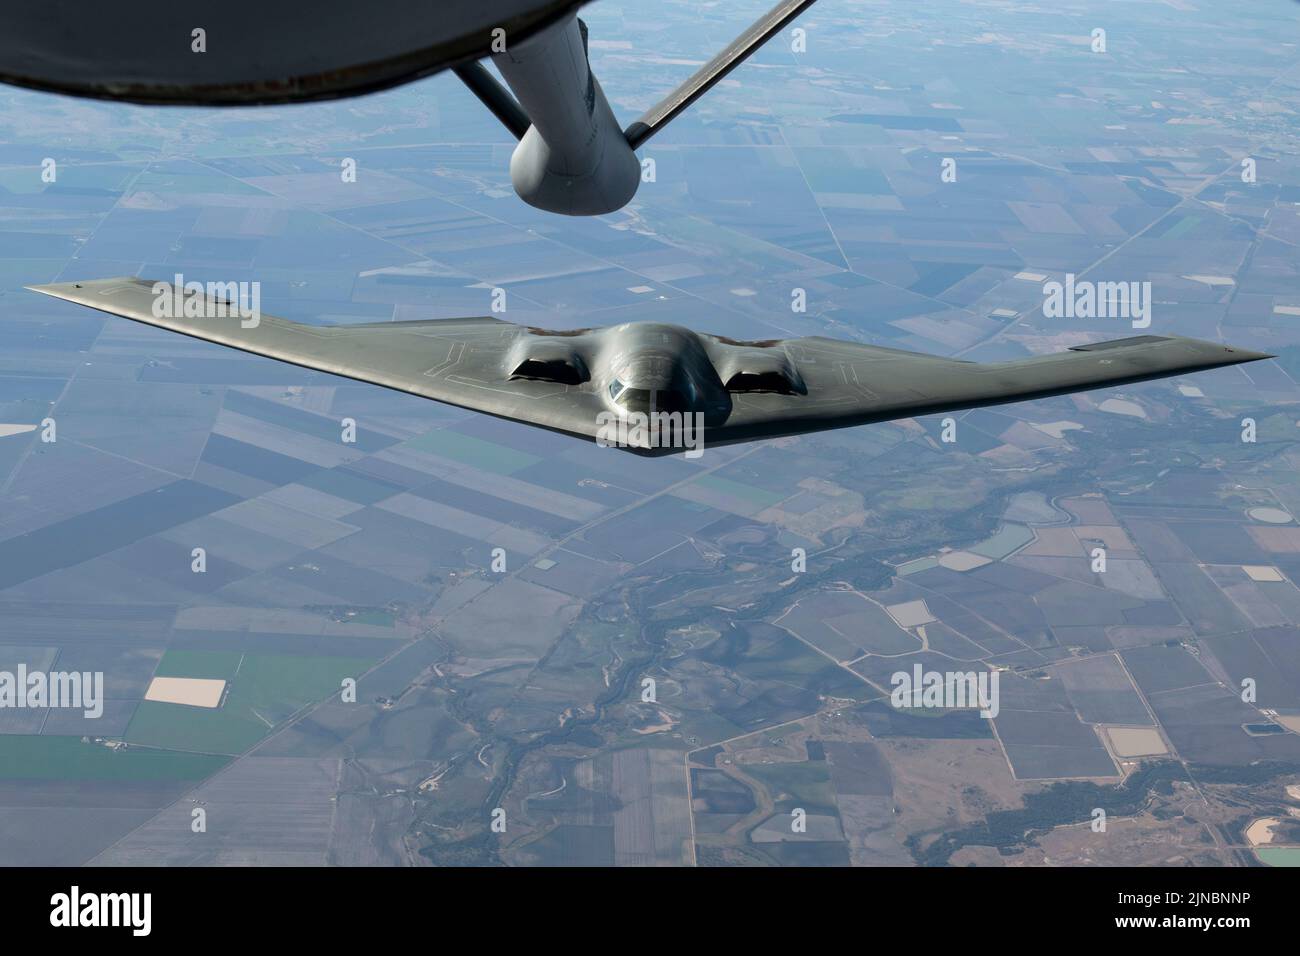 Amberley, Australia. 18 July, 2022. U.S. Air Force B-2 Spirit stealth strategic bombers, with the 509th Bomb Wing, approaches a KC-135 tanker to refuel escorted by Royal Australian Air Force fighter aircraft during exercise Koolendong 22, July 18, 2022 over Australia.  Credit: TSgt. Dylan Nuckolls/US Air Force/Alamy Live News Stock Photo